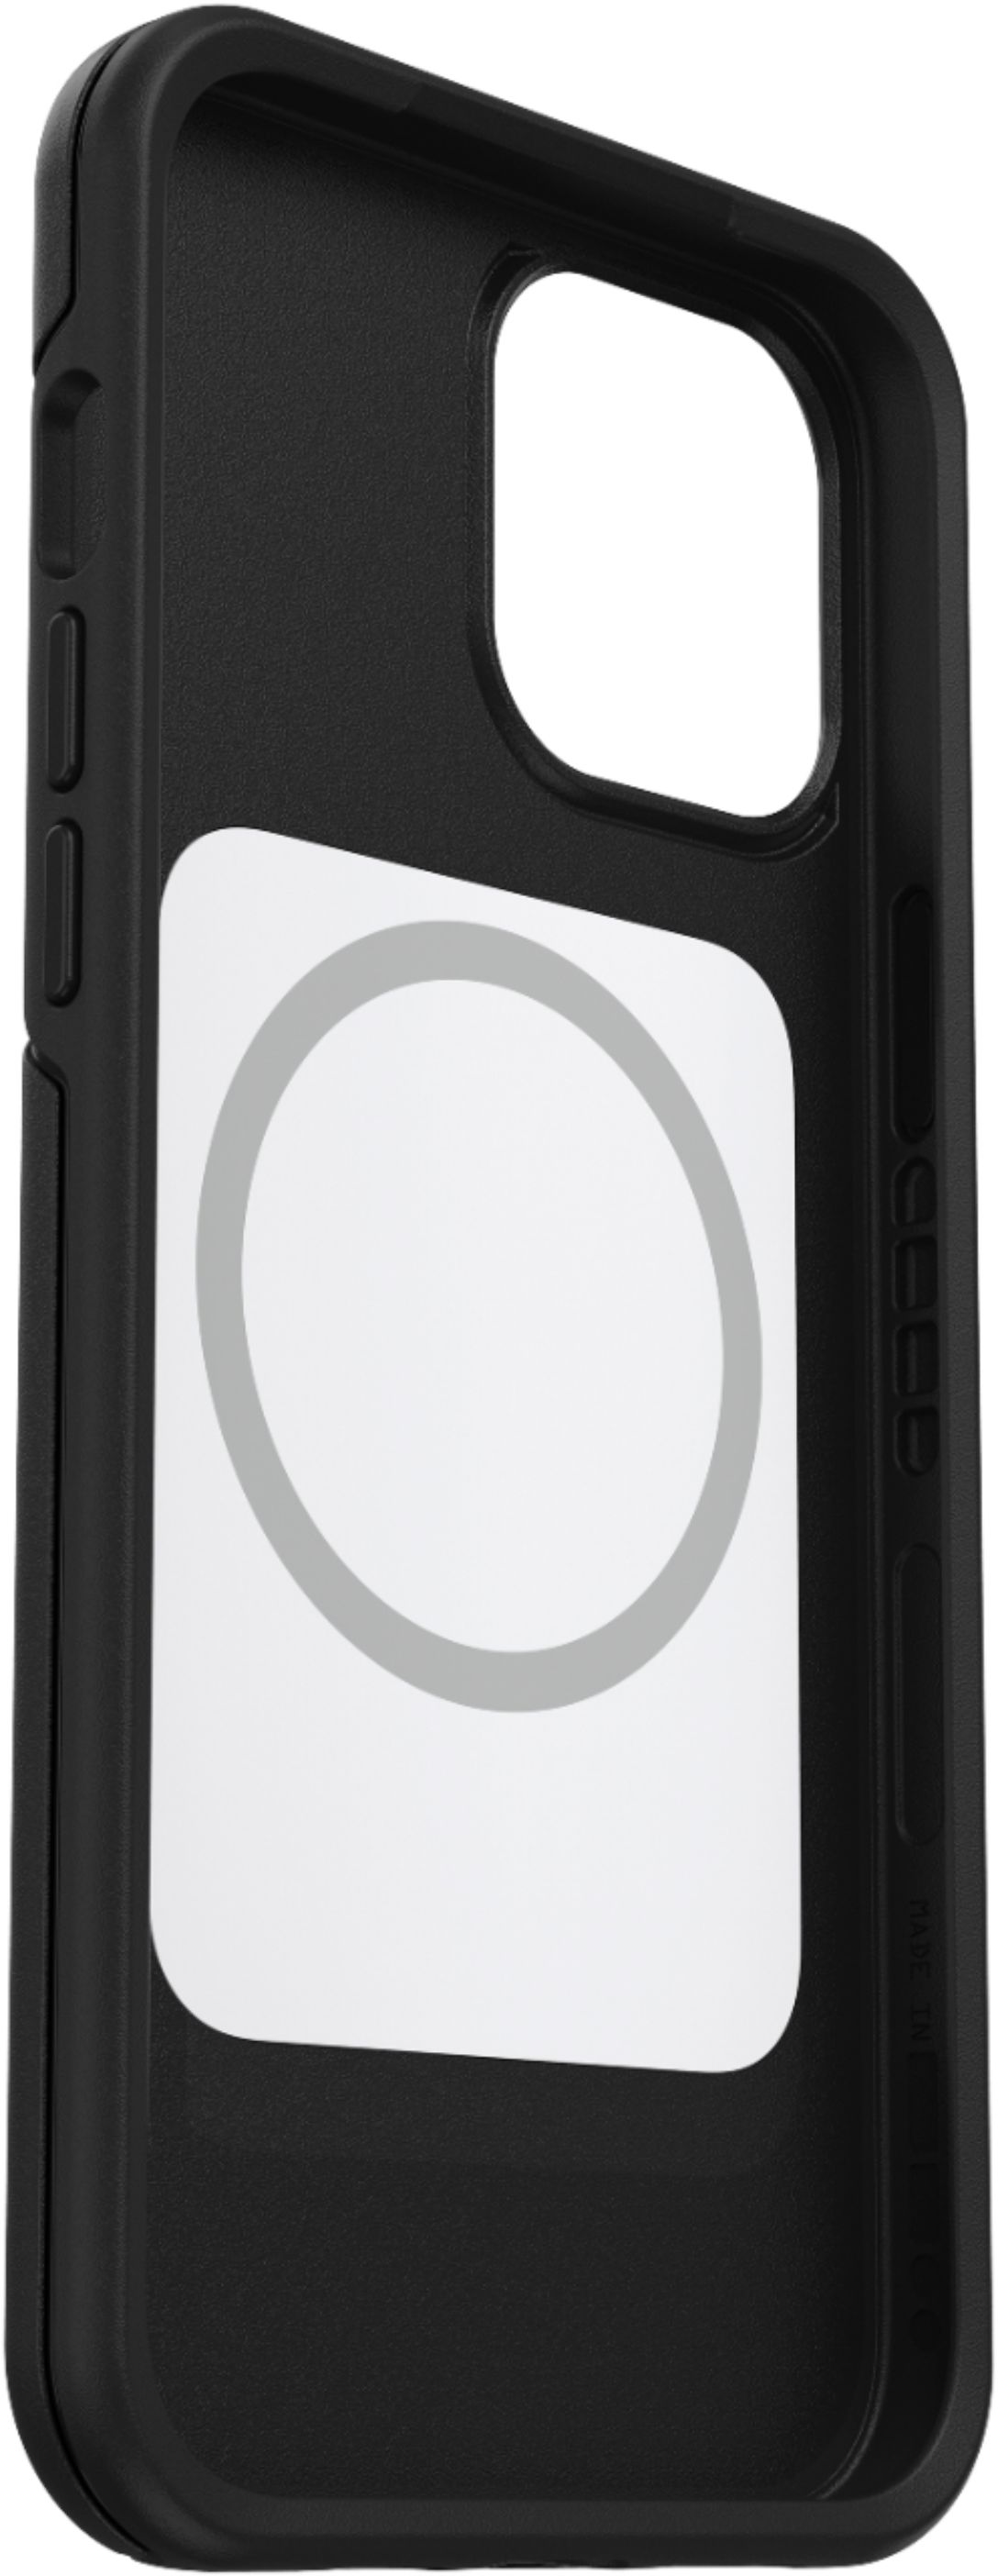 Best Buy Otterbox Symmetry Series With Magsafe Carrying Case For Apple Iphone 12 Pro Max Black 77